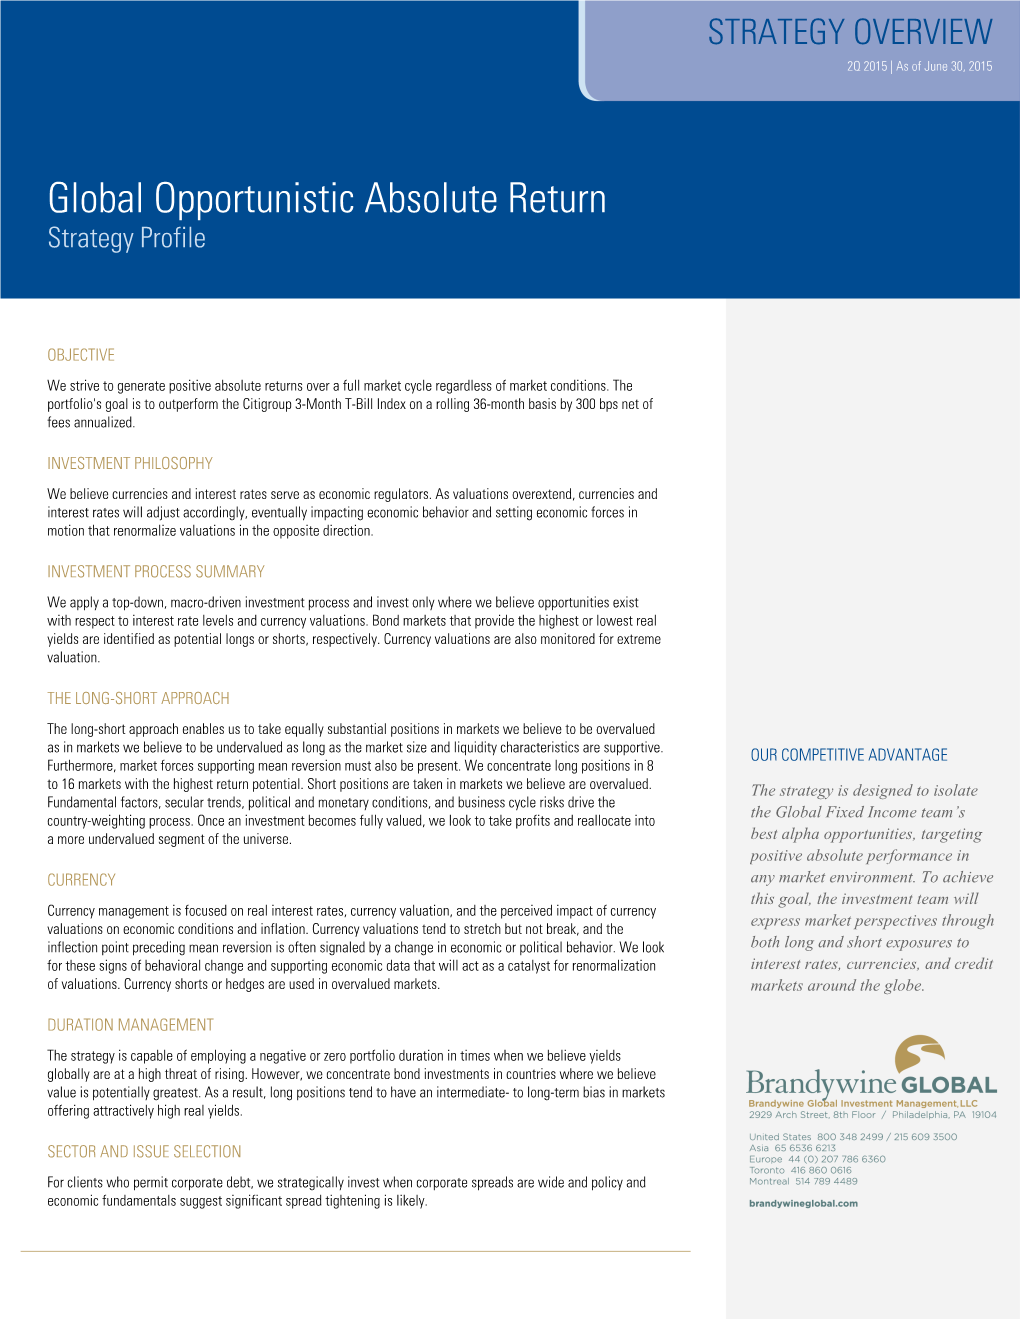 Global Opportunistic Absolute Return Strategy Profile